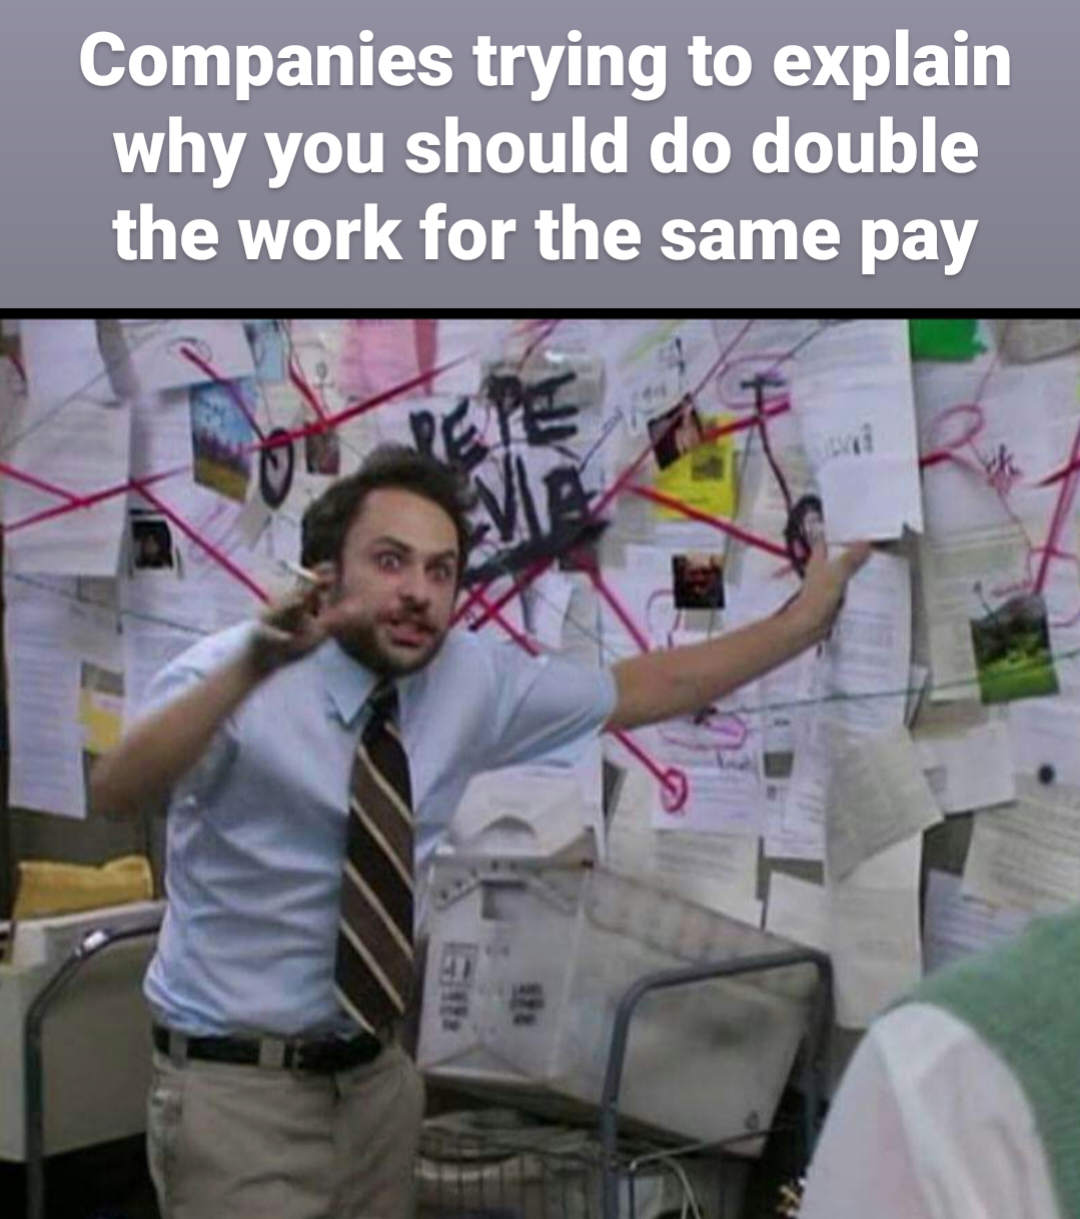 anti-work memes reddit - communication - Companies trying to explain why you should do double the work for the same pay Repe A Gd